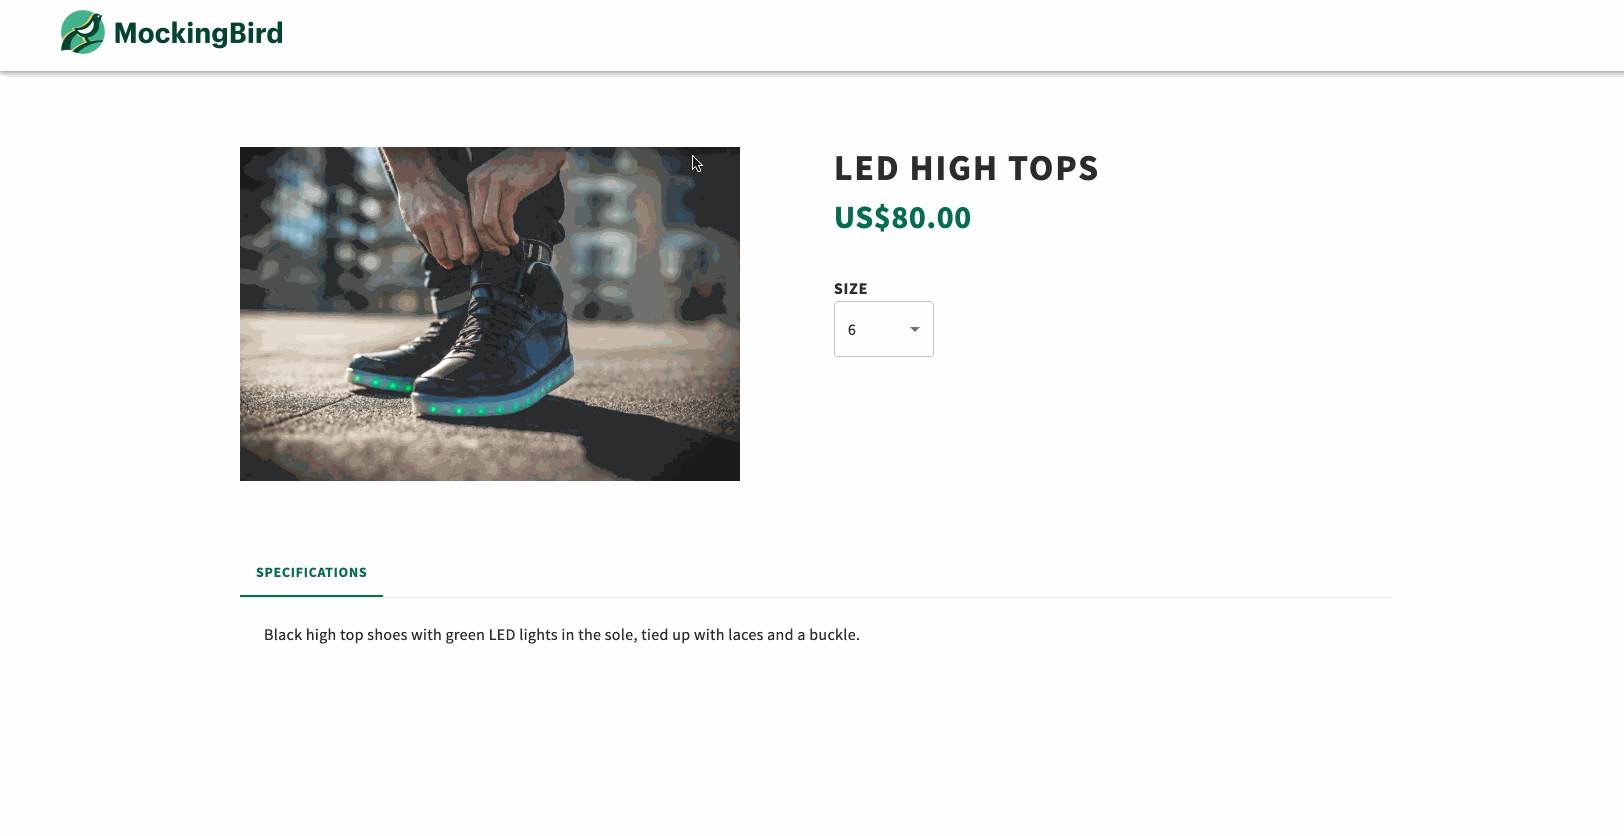 An image of the product page featuring LED high tops and a size dropdown list